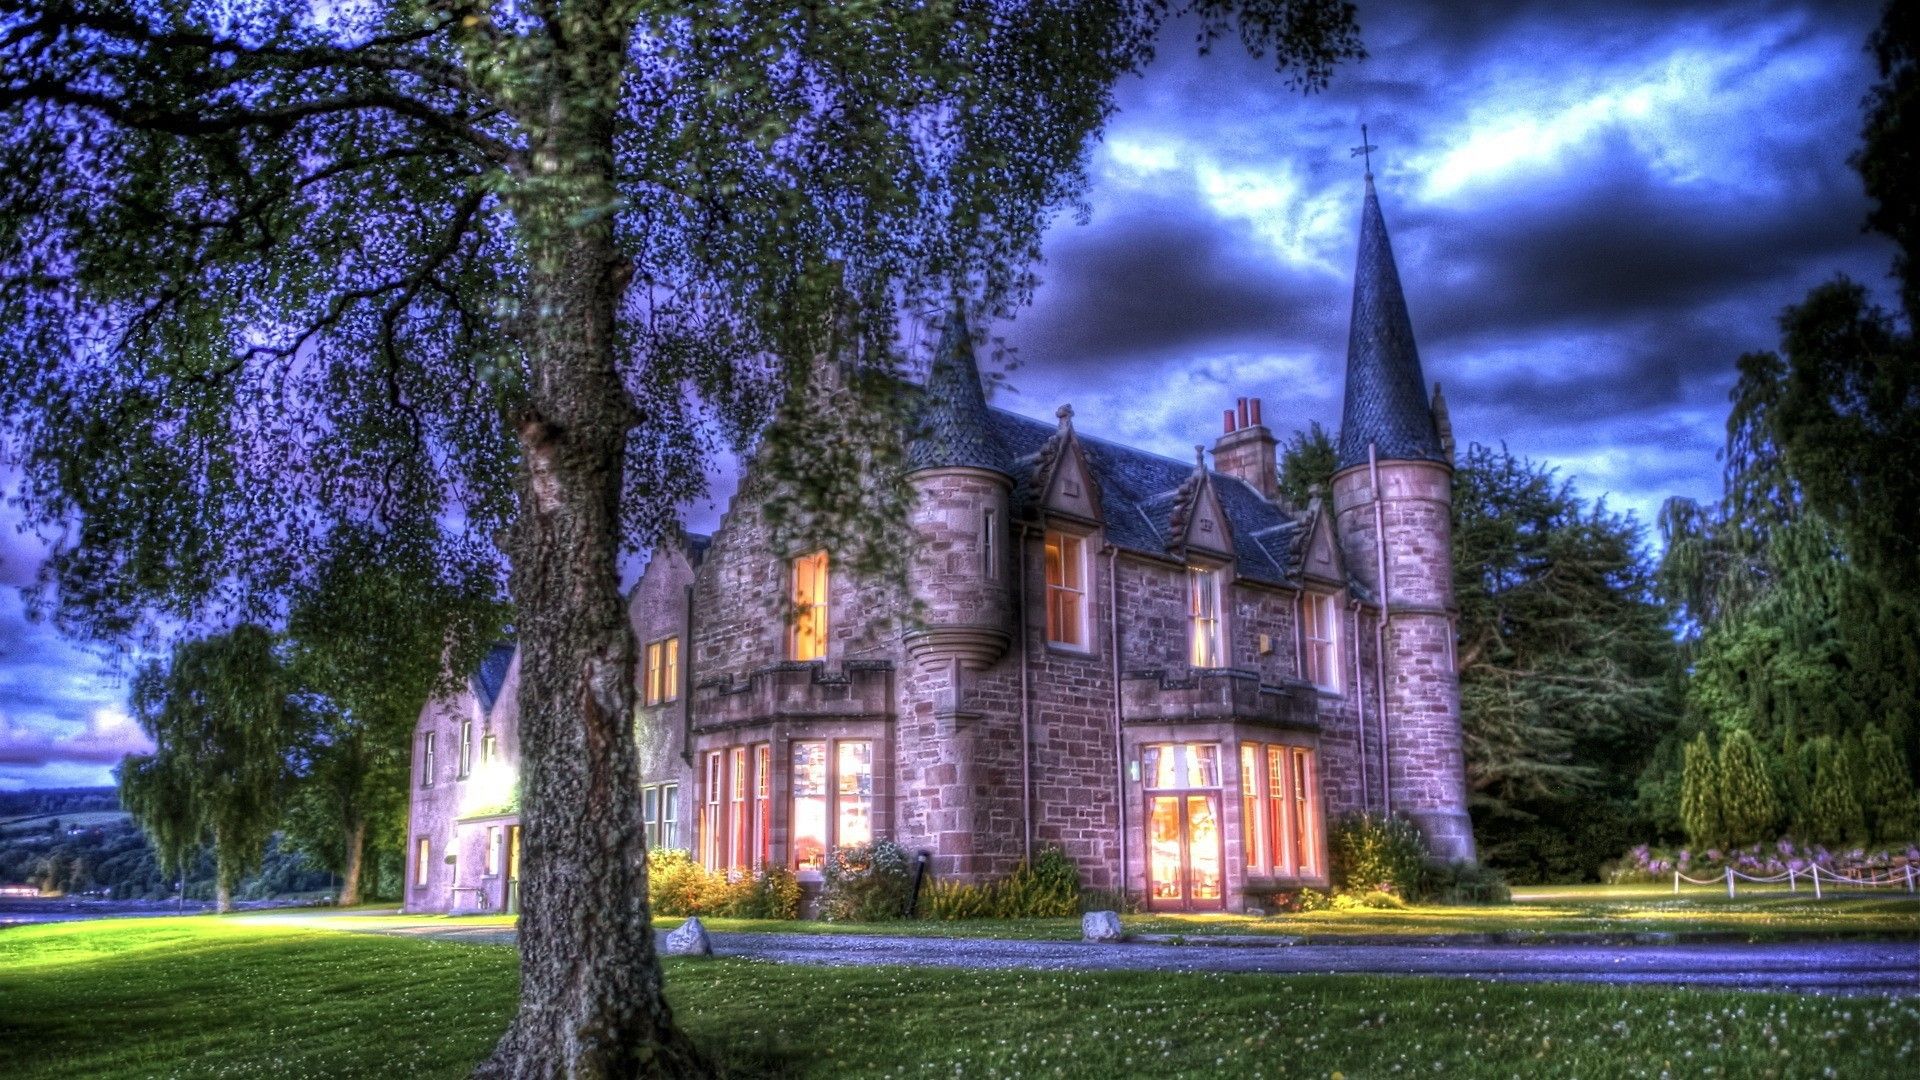 Wonderful Bunchrew House In Inverness Scotland HDr Wallpaper